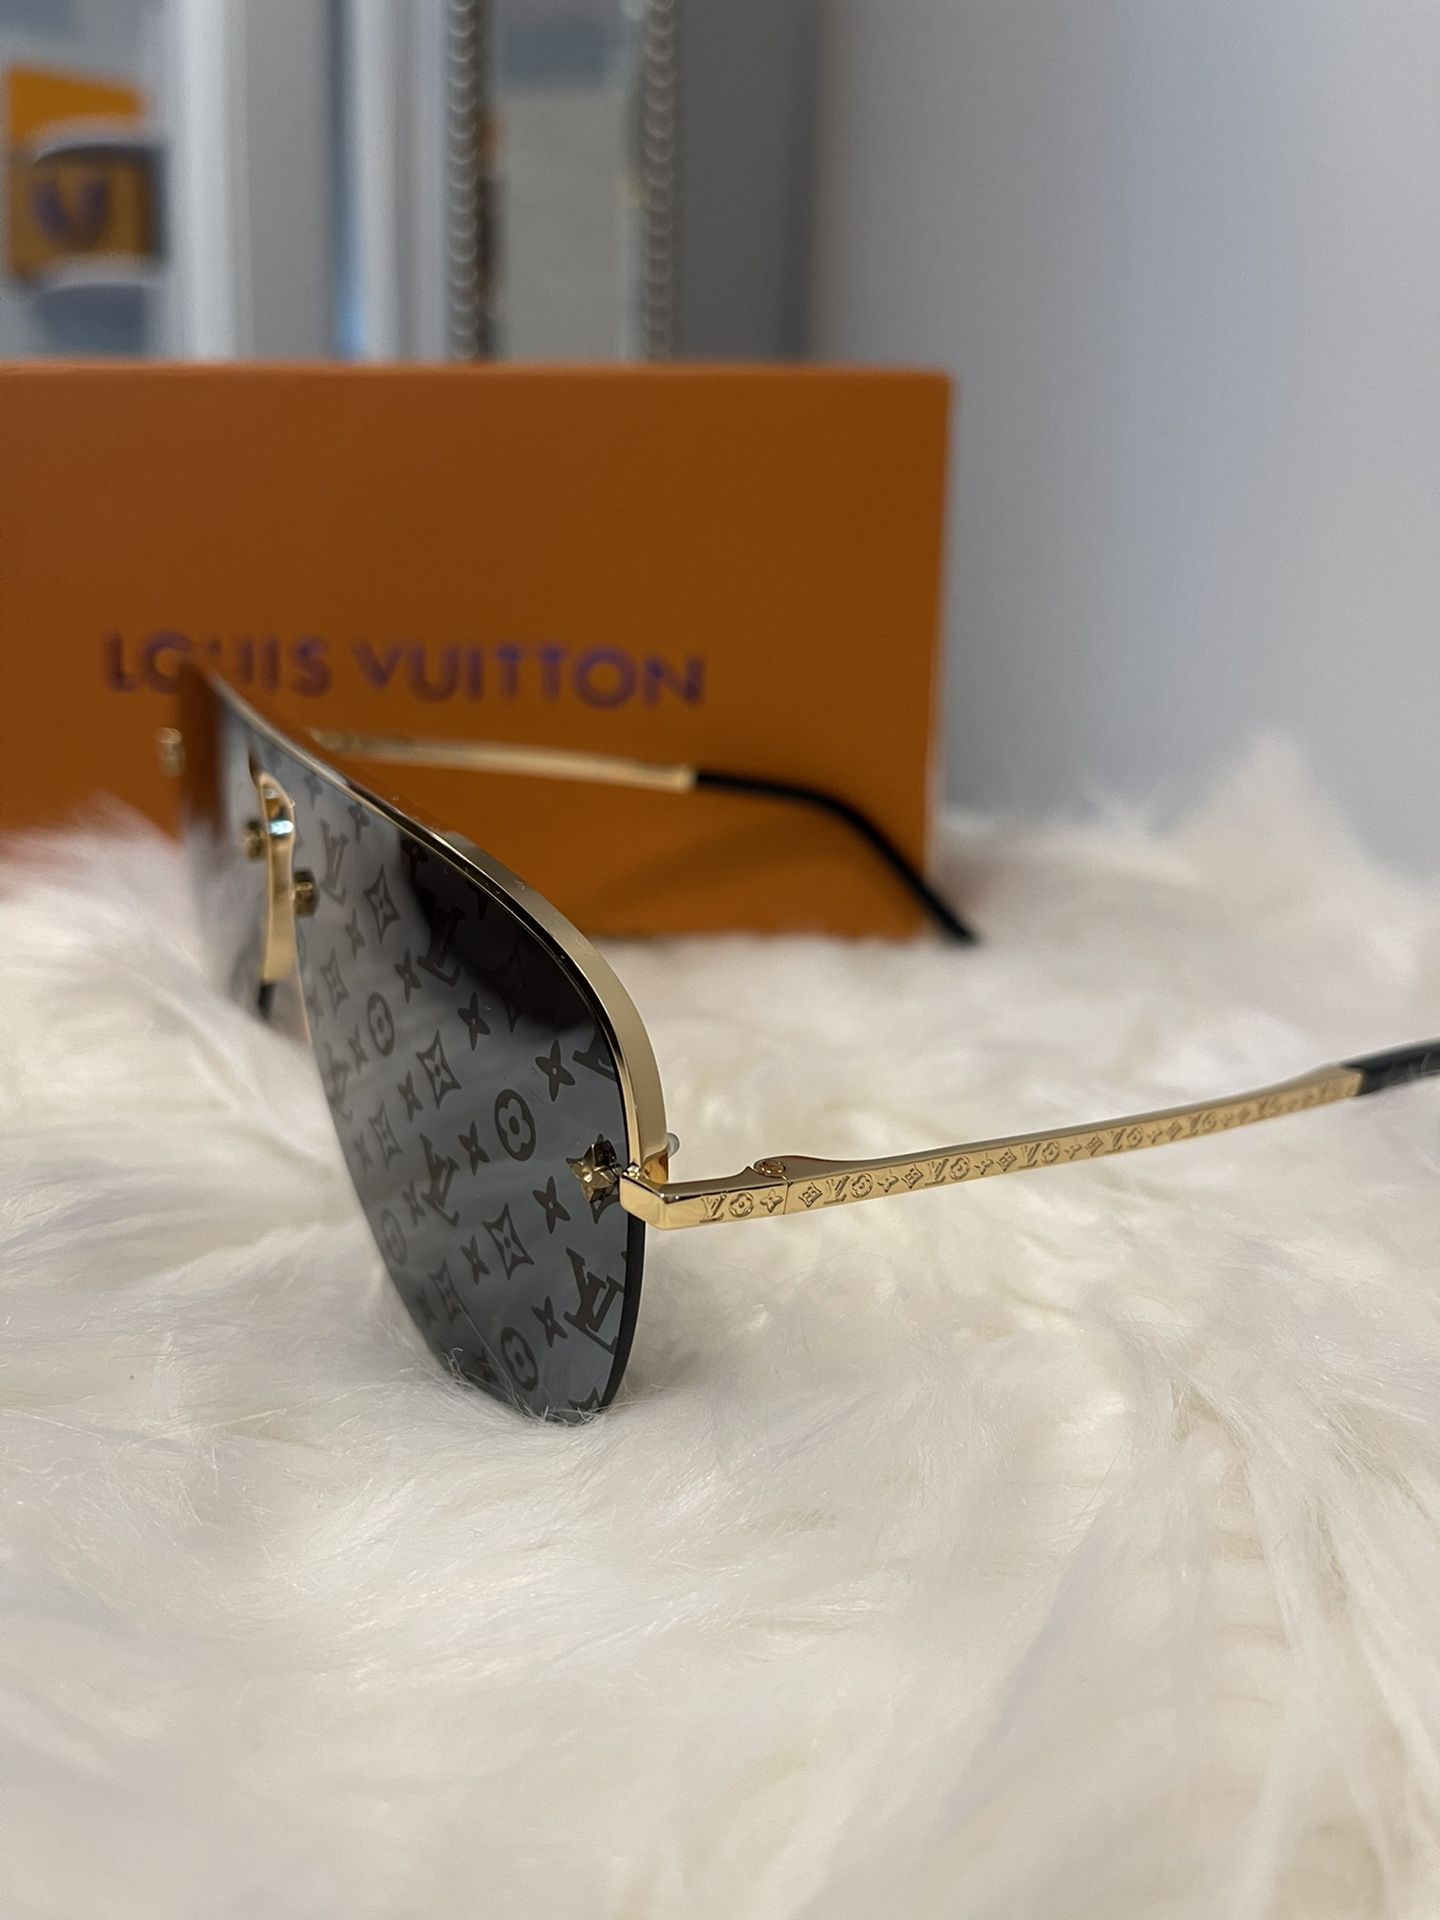 Louis Vuitton Sunglasses- Unisex for Sale in Katonah, NY - OfferUp